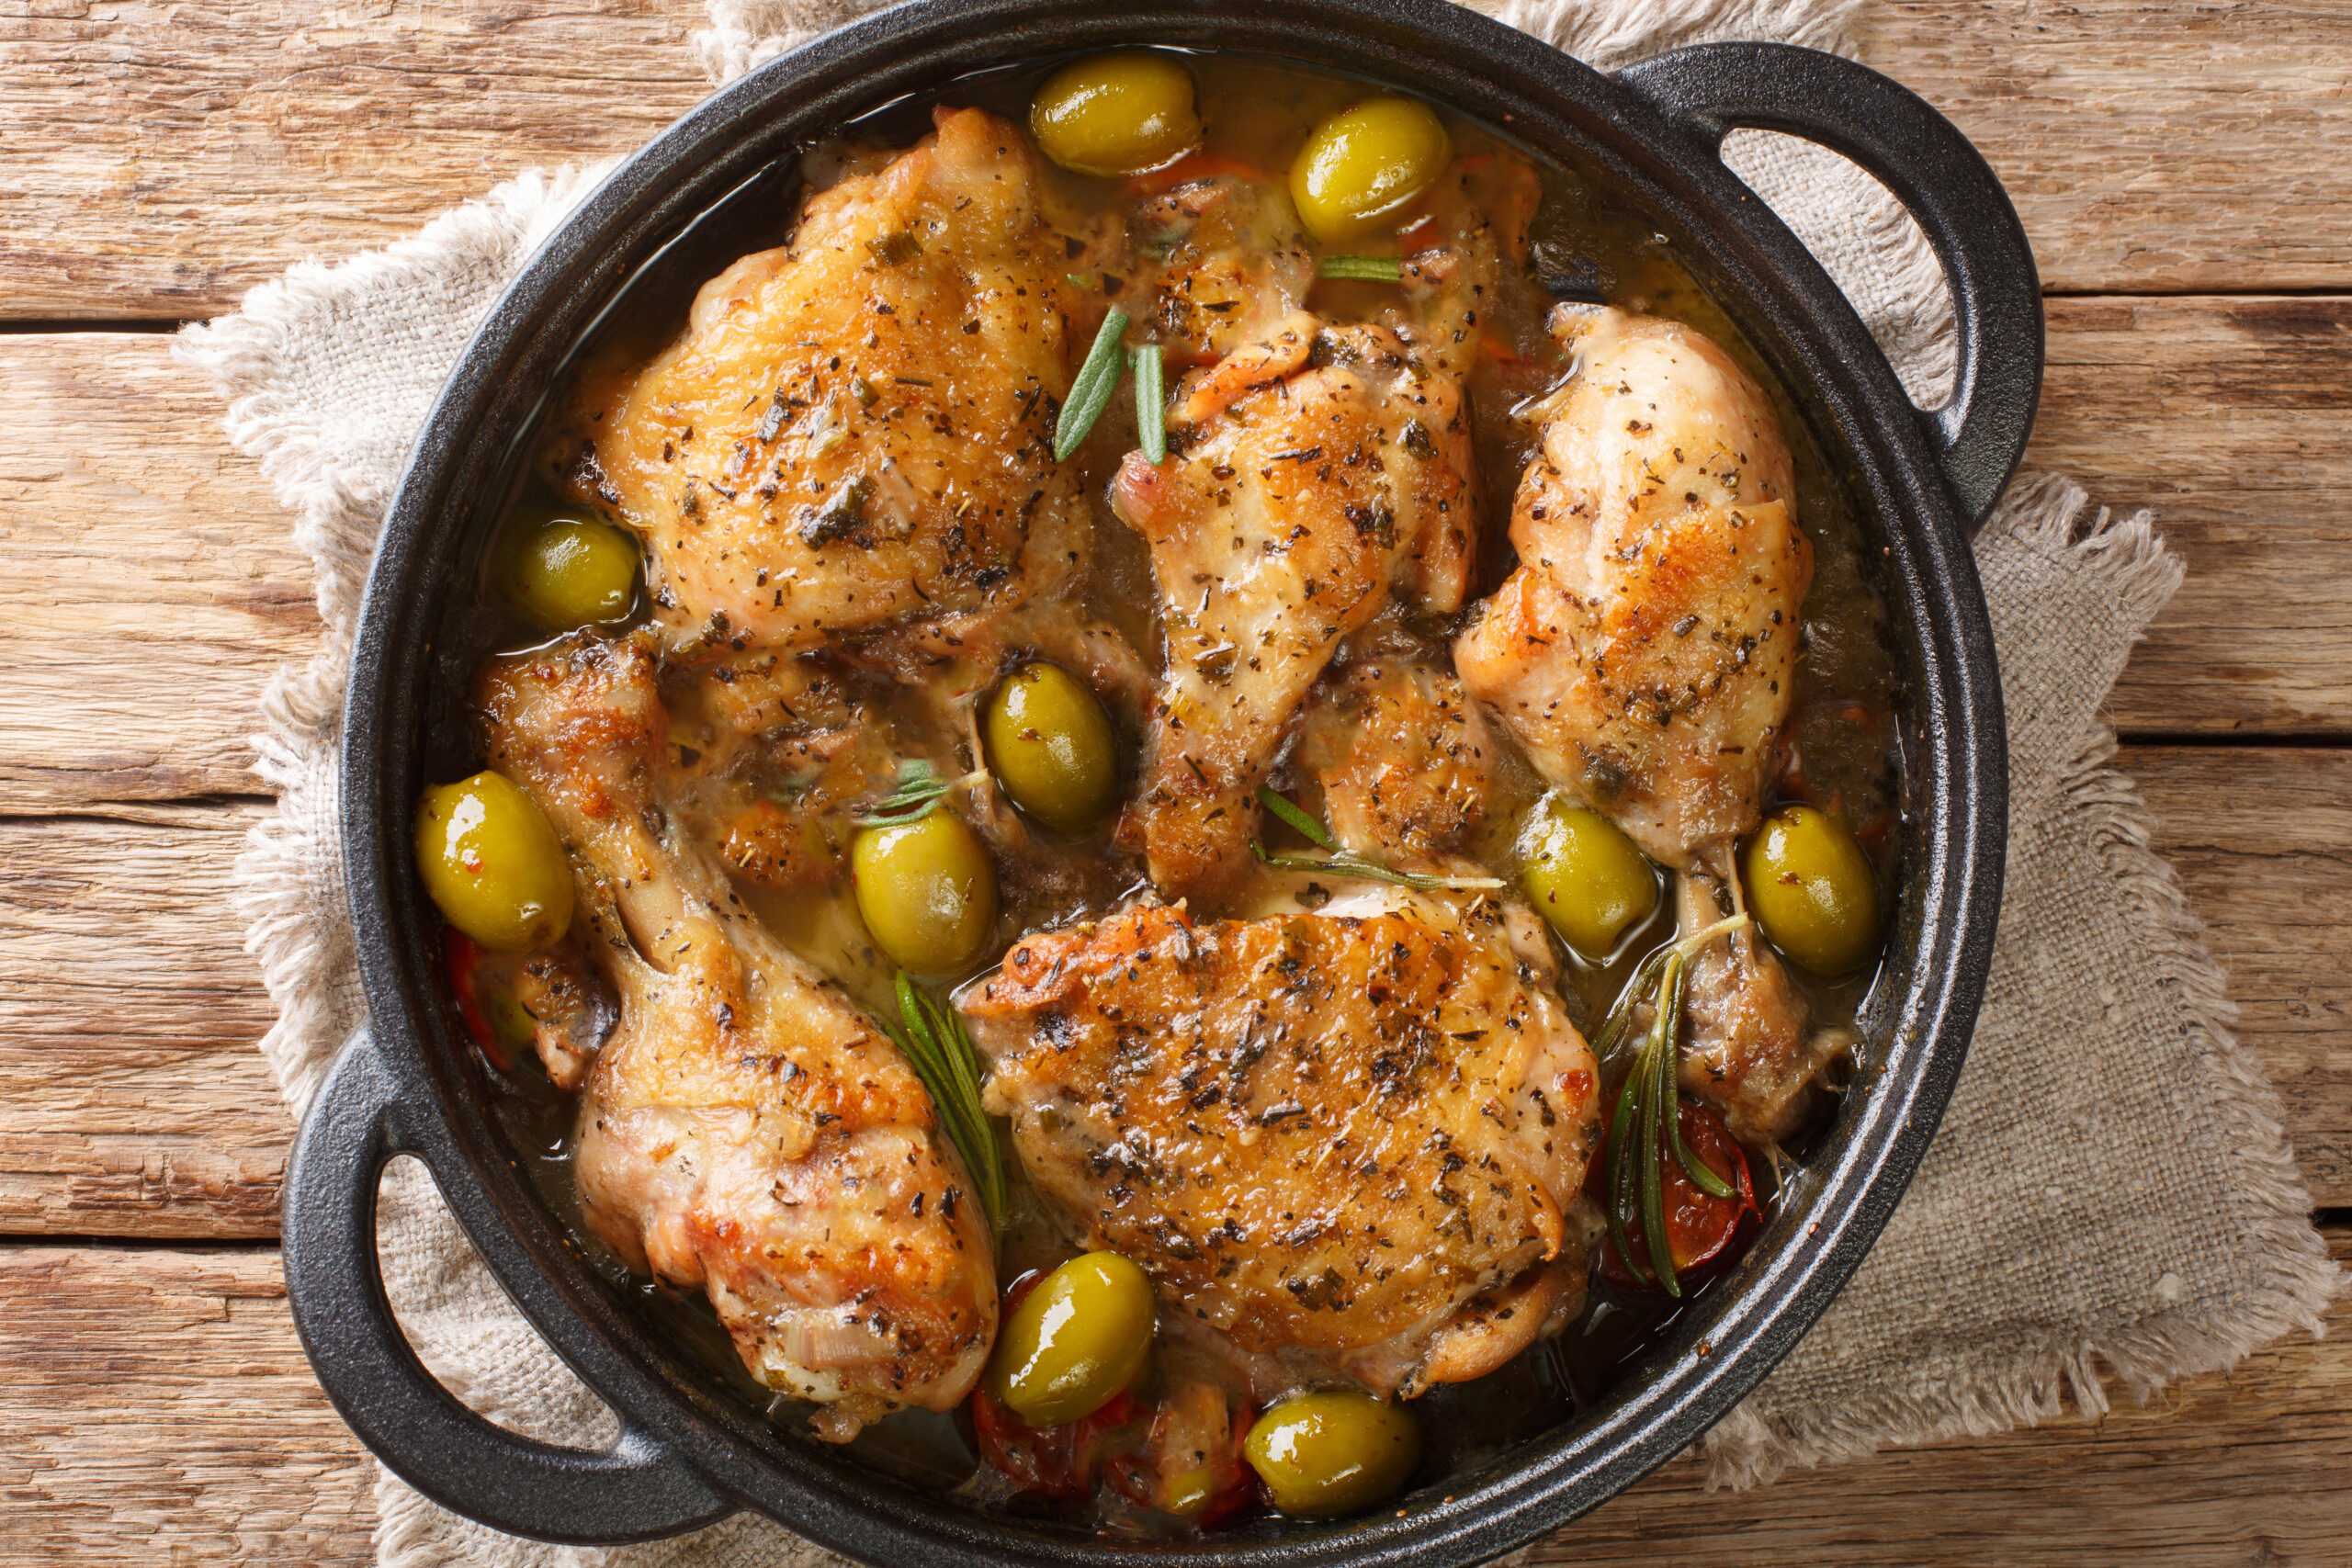 Chicken and olives in a skillet